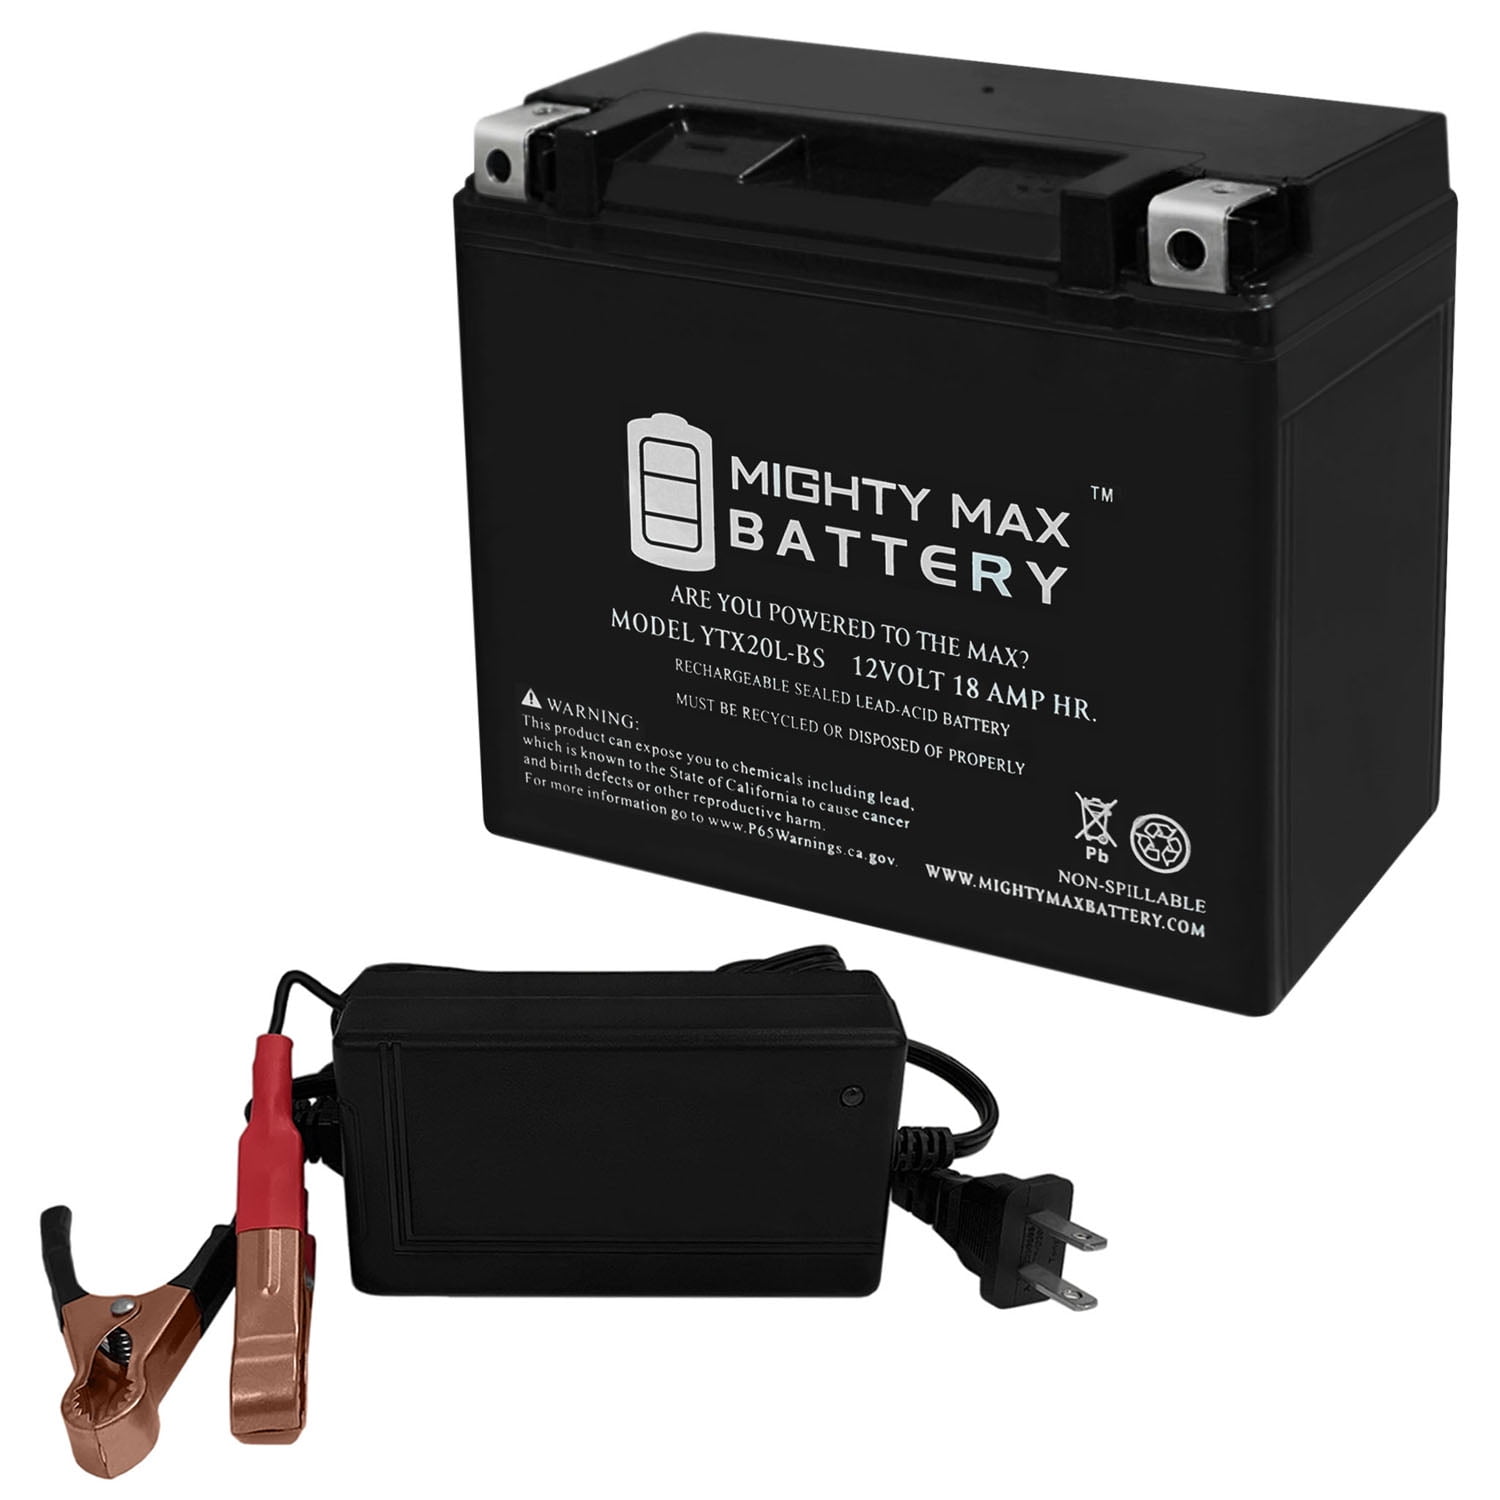 Mighty Max Battery 18 Volt 2 Amp SLA Battery Charger and Maintainer Brand Product 